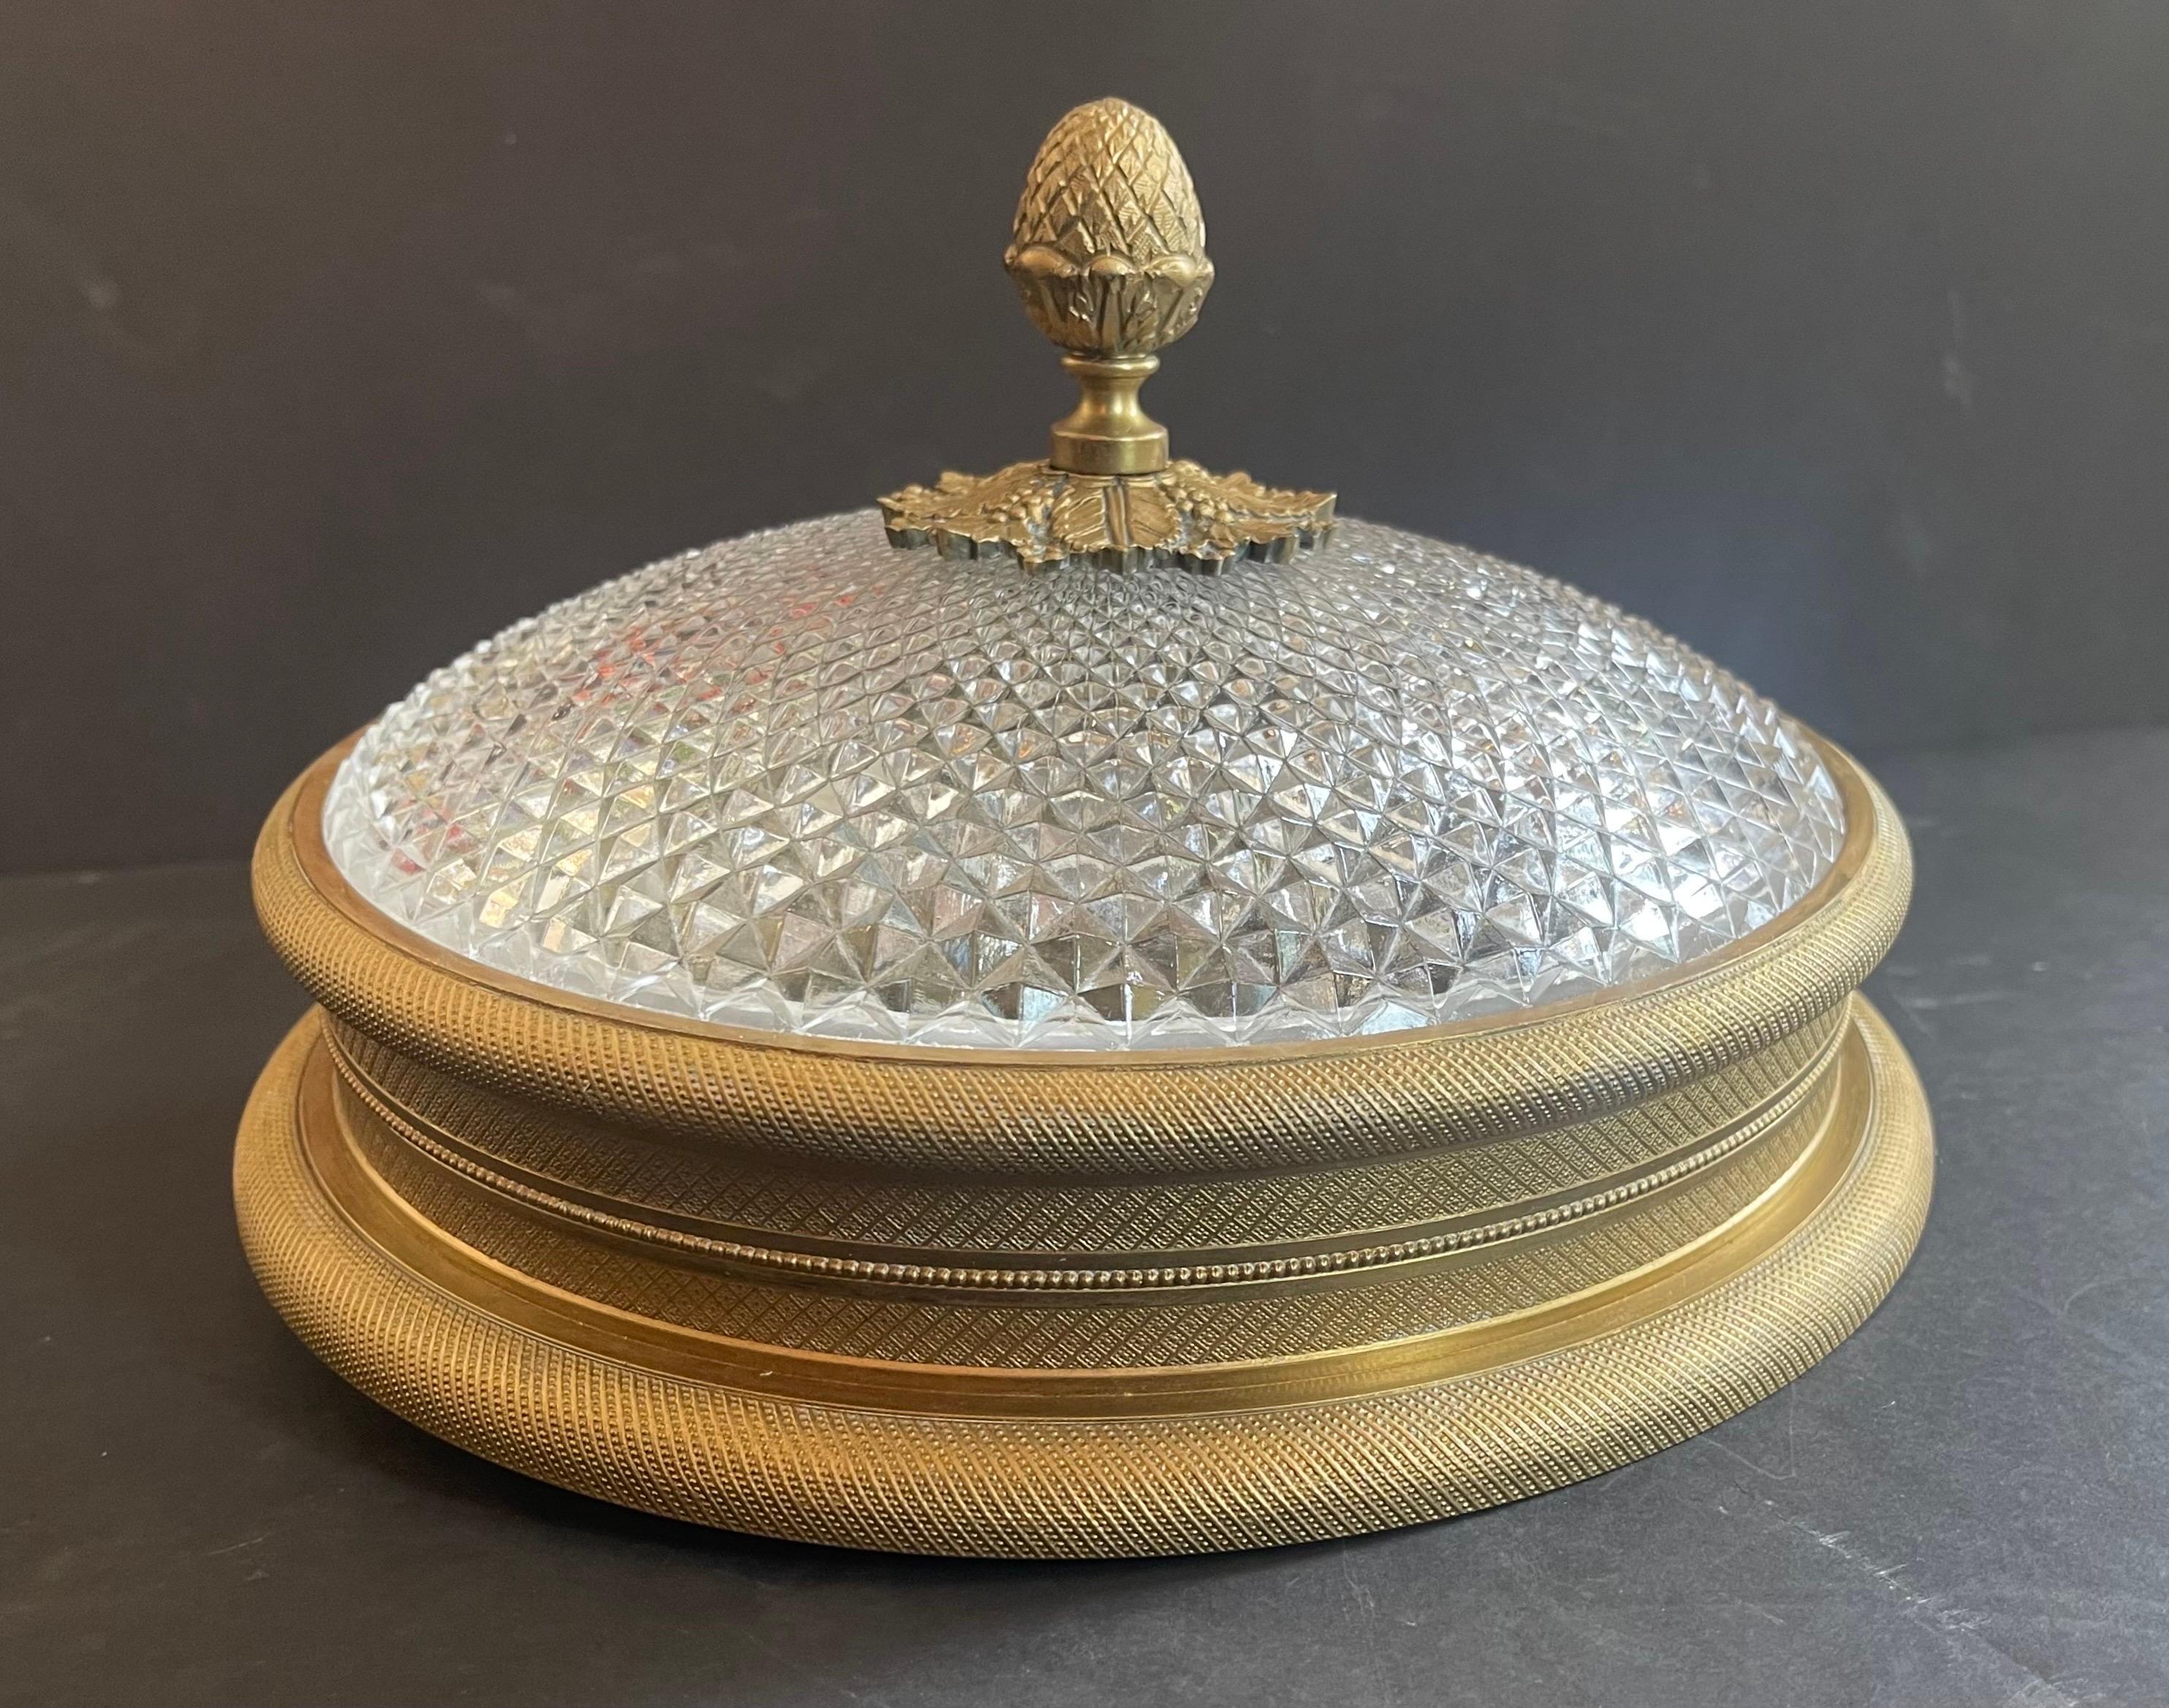 A wonderful neoclassical Sherle Wagner vintage knurled ceiling light in doré bronze gold patina. This low profile two candelabra light fixture (max 60watts per socket) is perfect for lower ceiling applications. This beautiful flush mount is finish